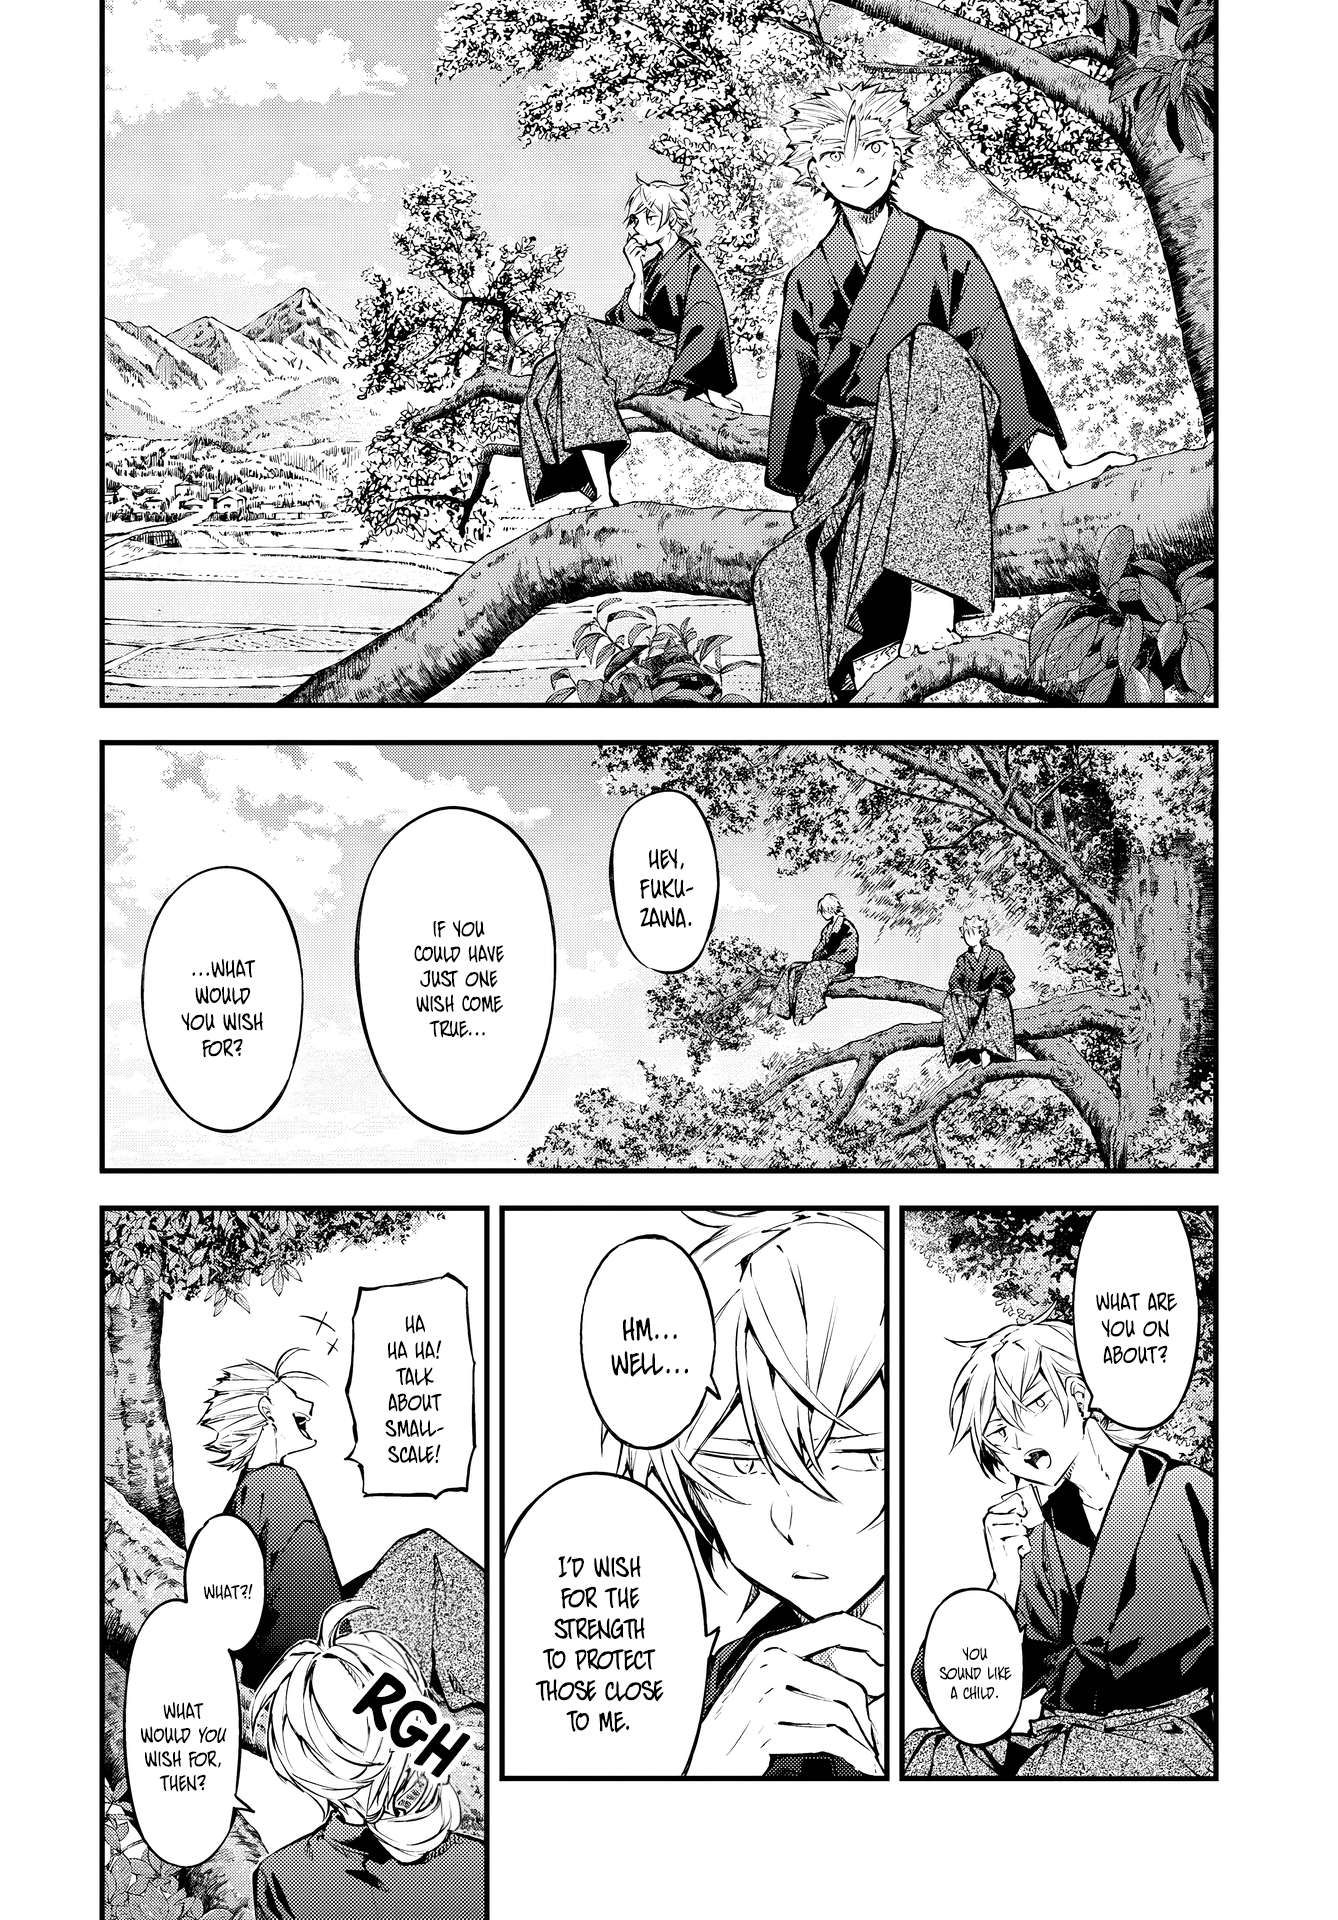 Bungo Stray Dogs chapter 113 page 22